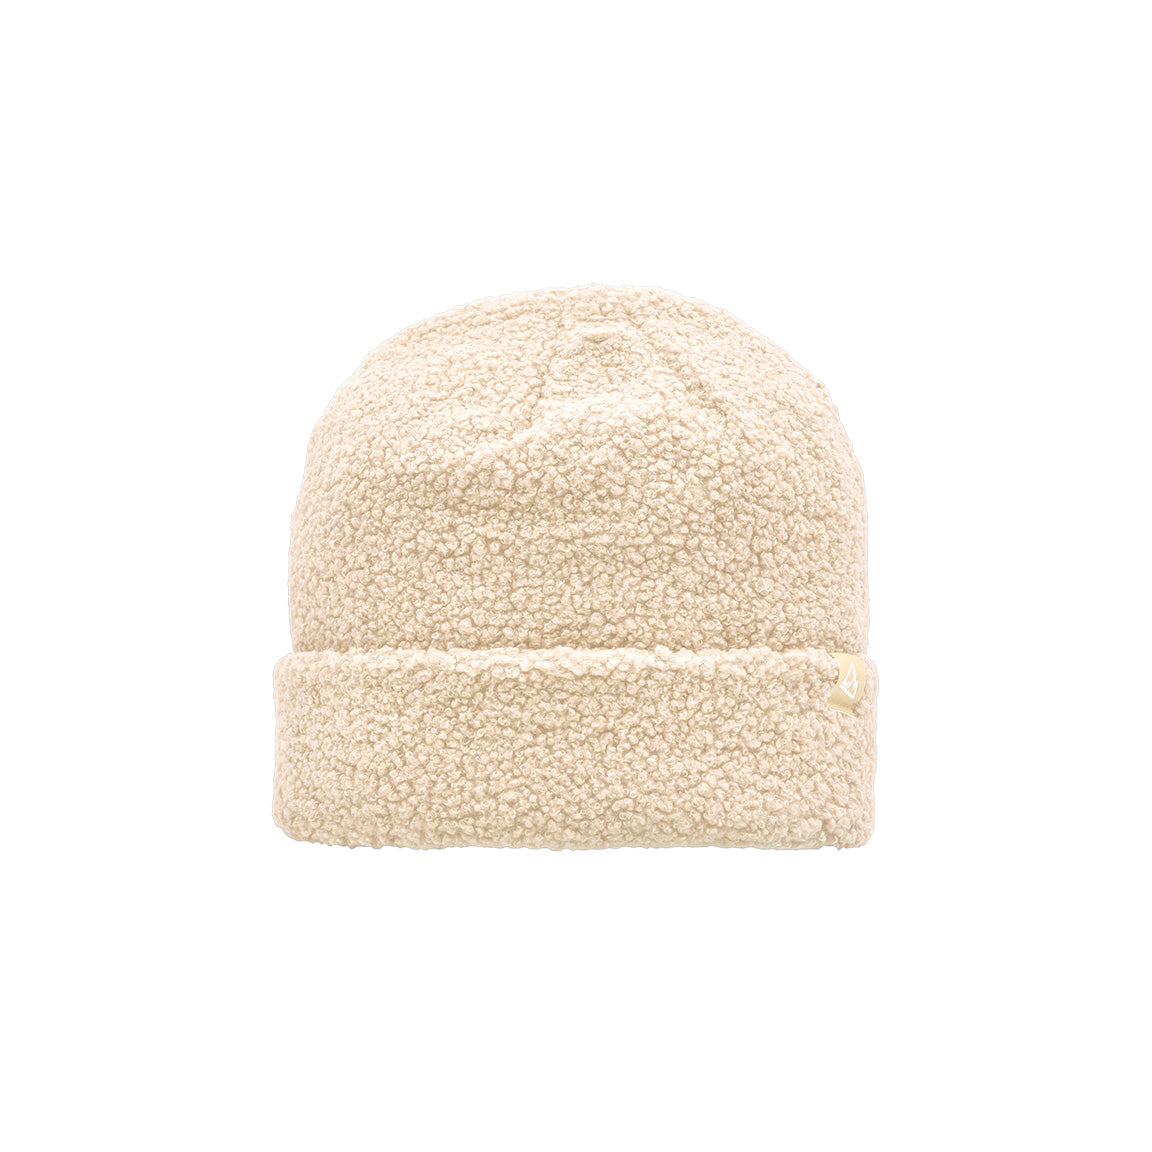 This is a cream-colored sherpa beanie with a plush, textured look and a small triangular logo patch on the cuff.